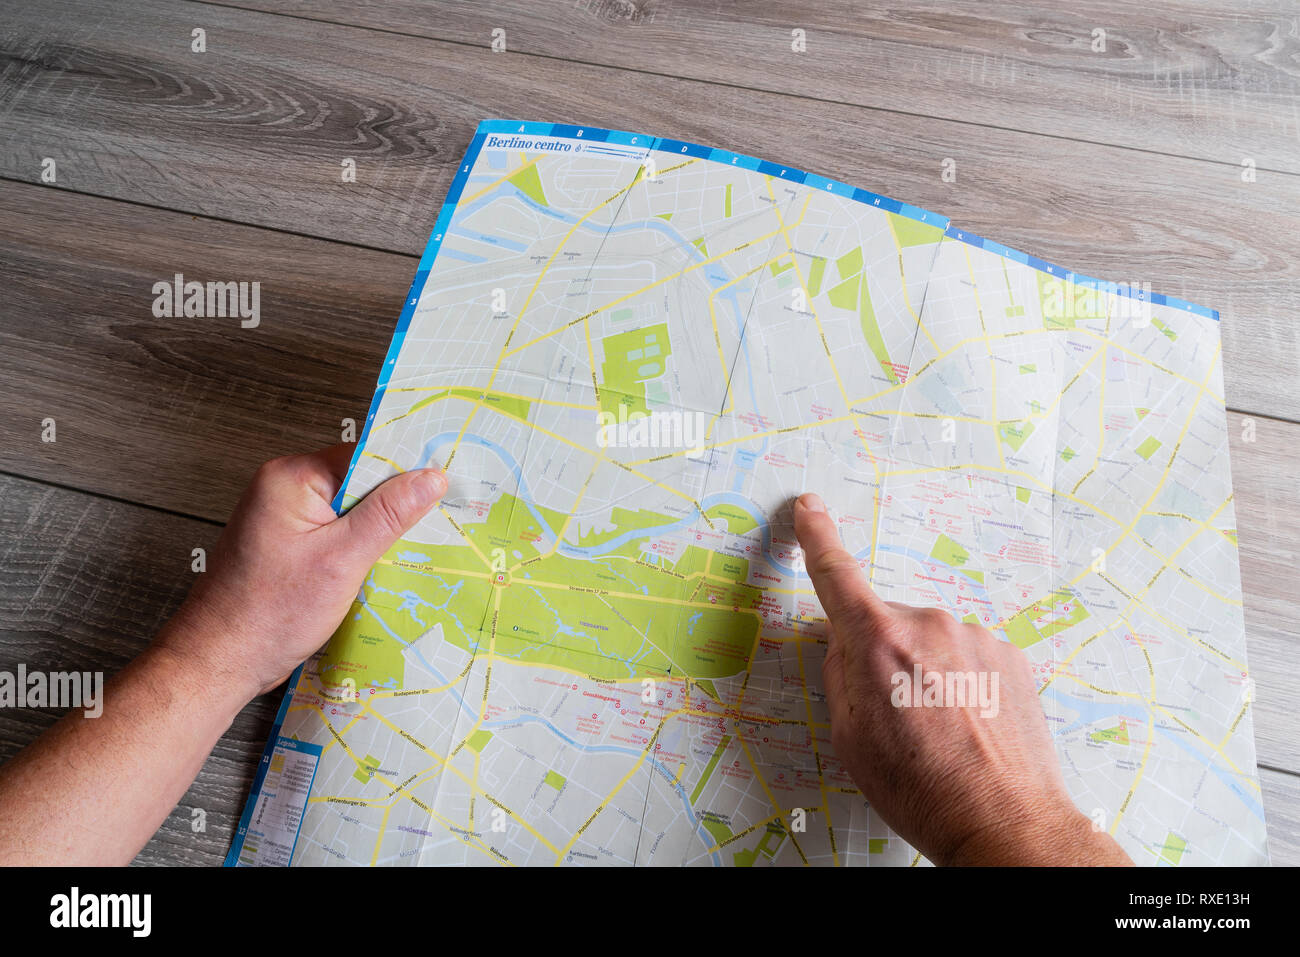 the consultation of the city map of Berlin Stock Photo